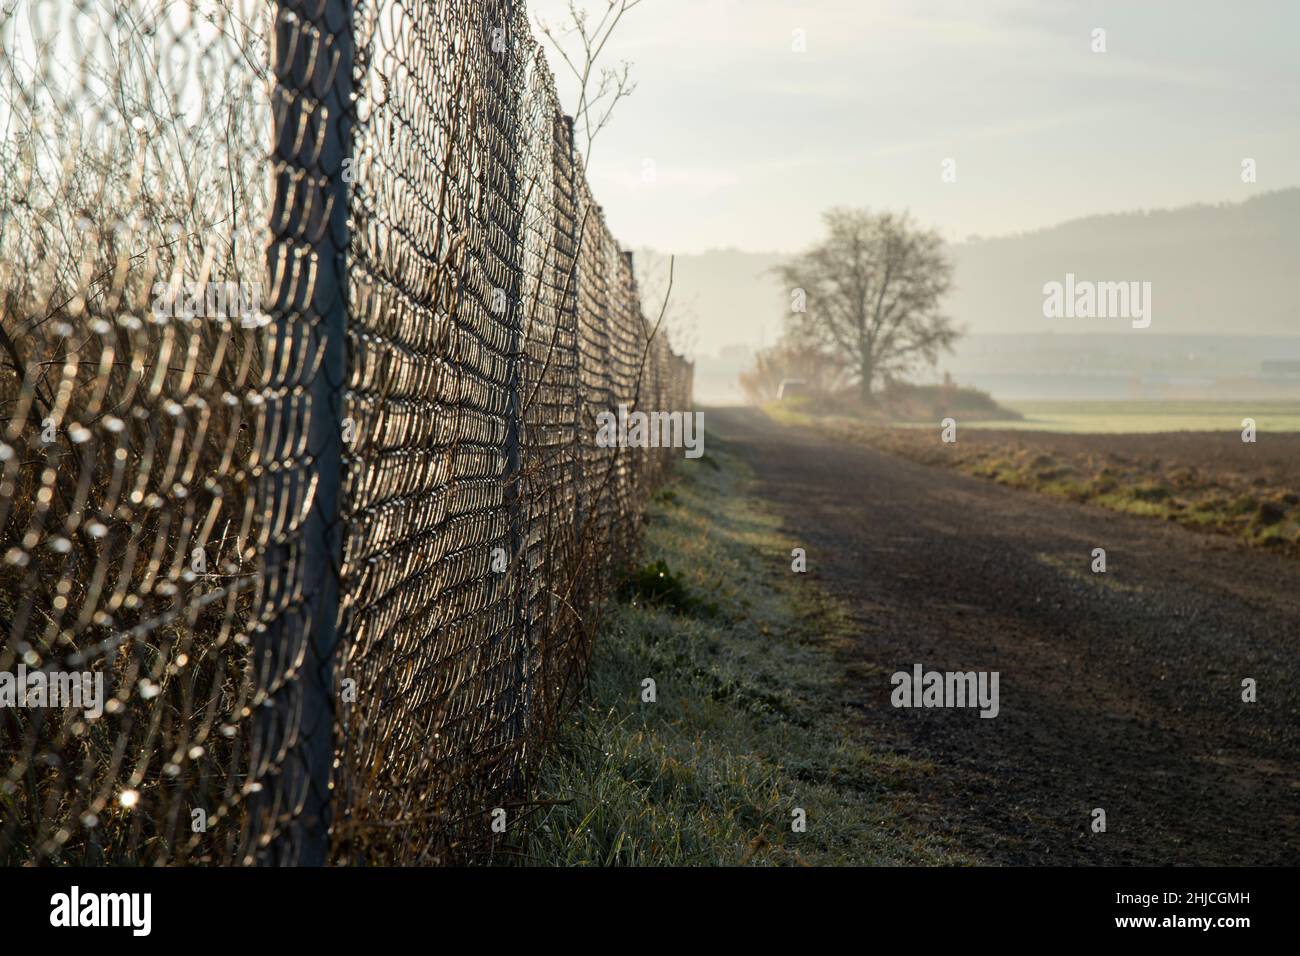 Landscape showing a long fence and a tree among the fog in the background at the end of a path Stock Photo